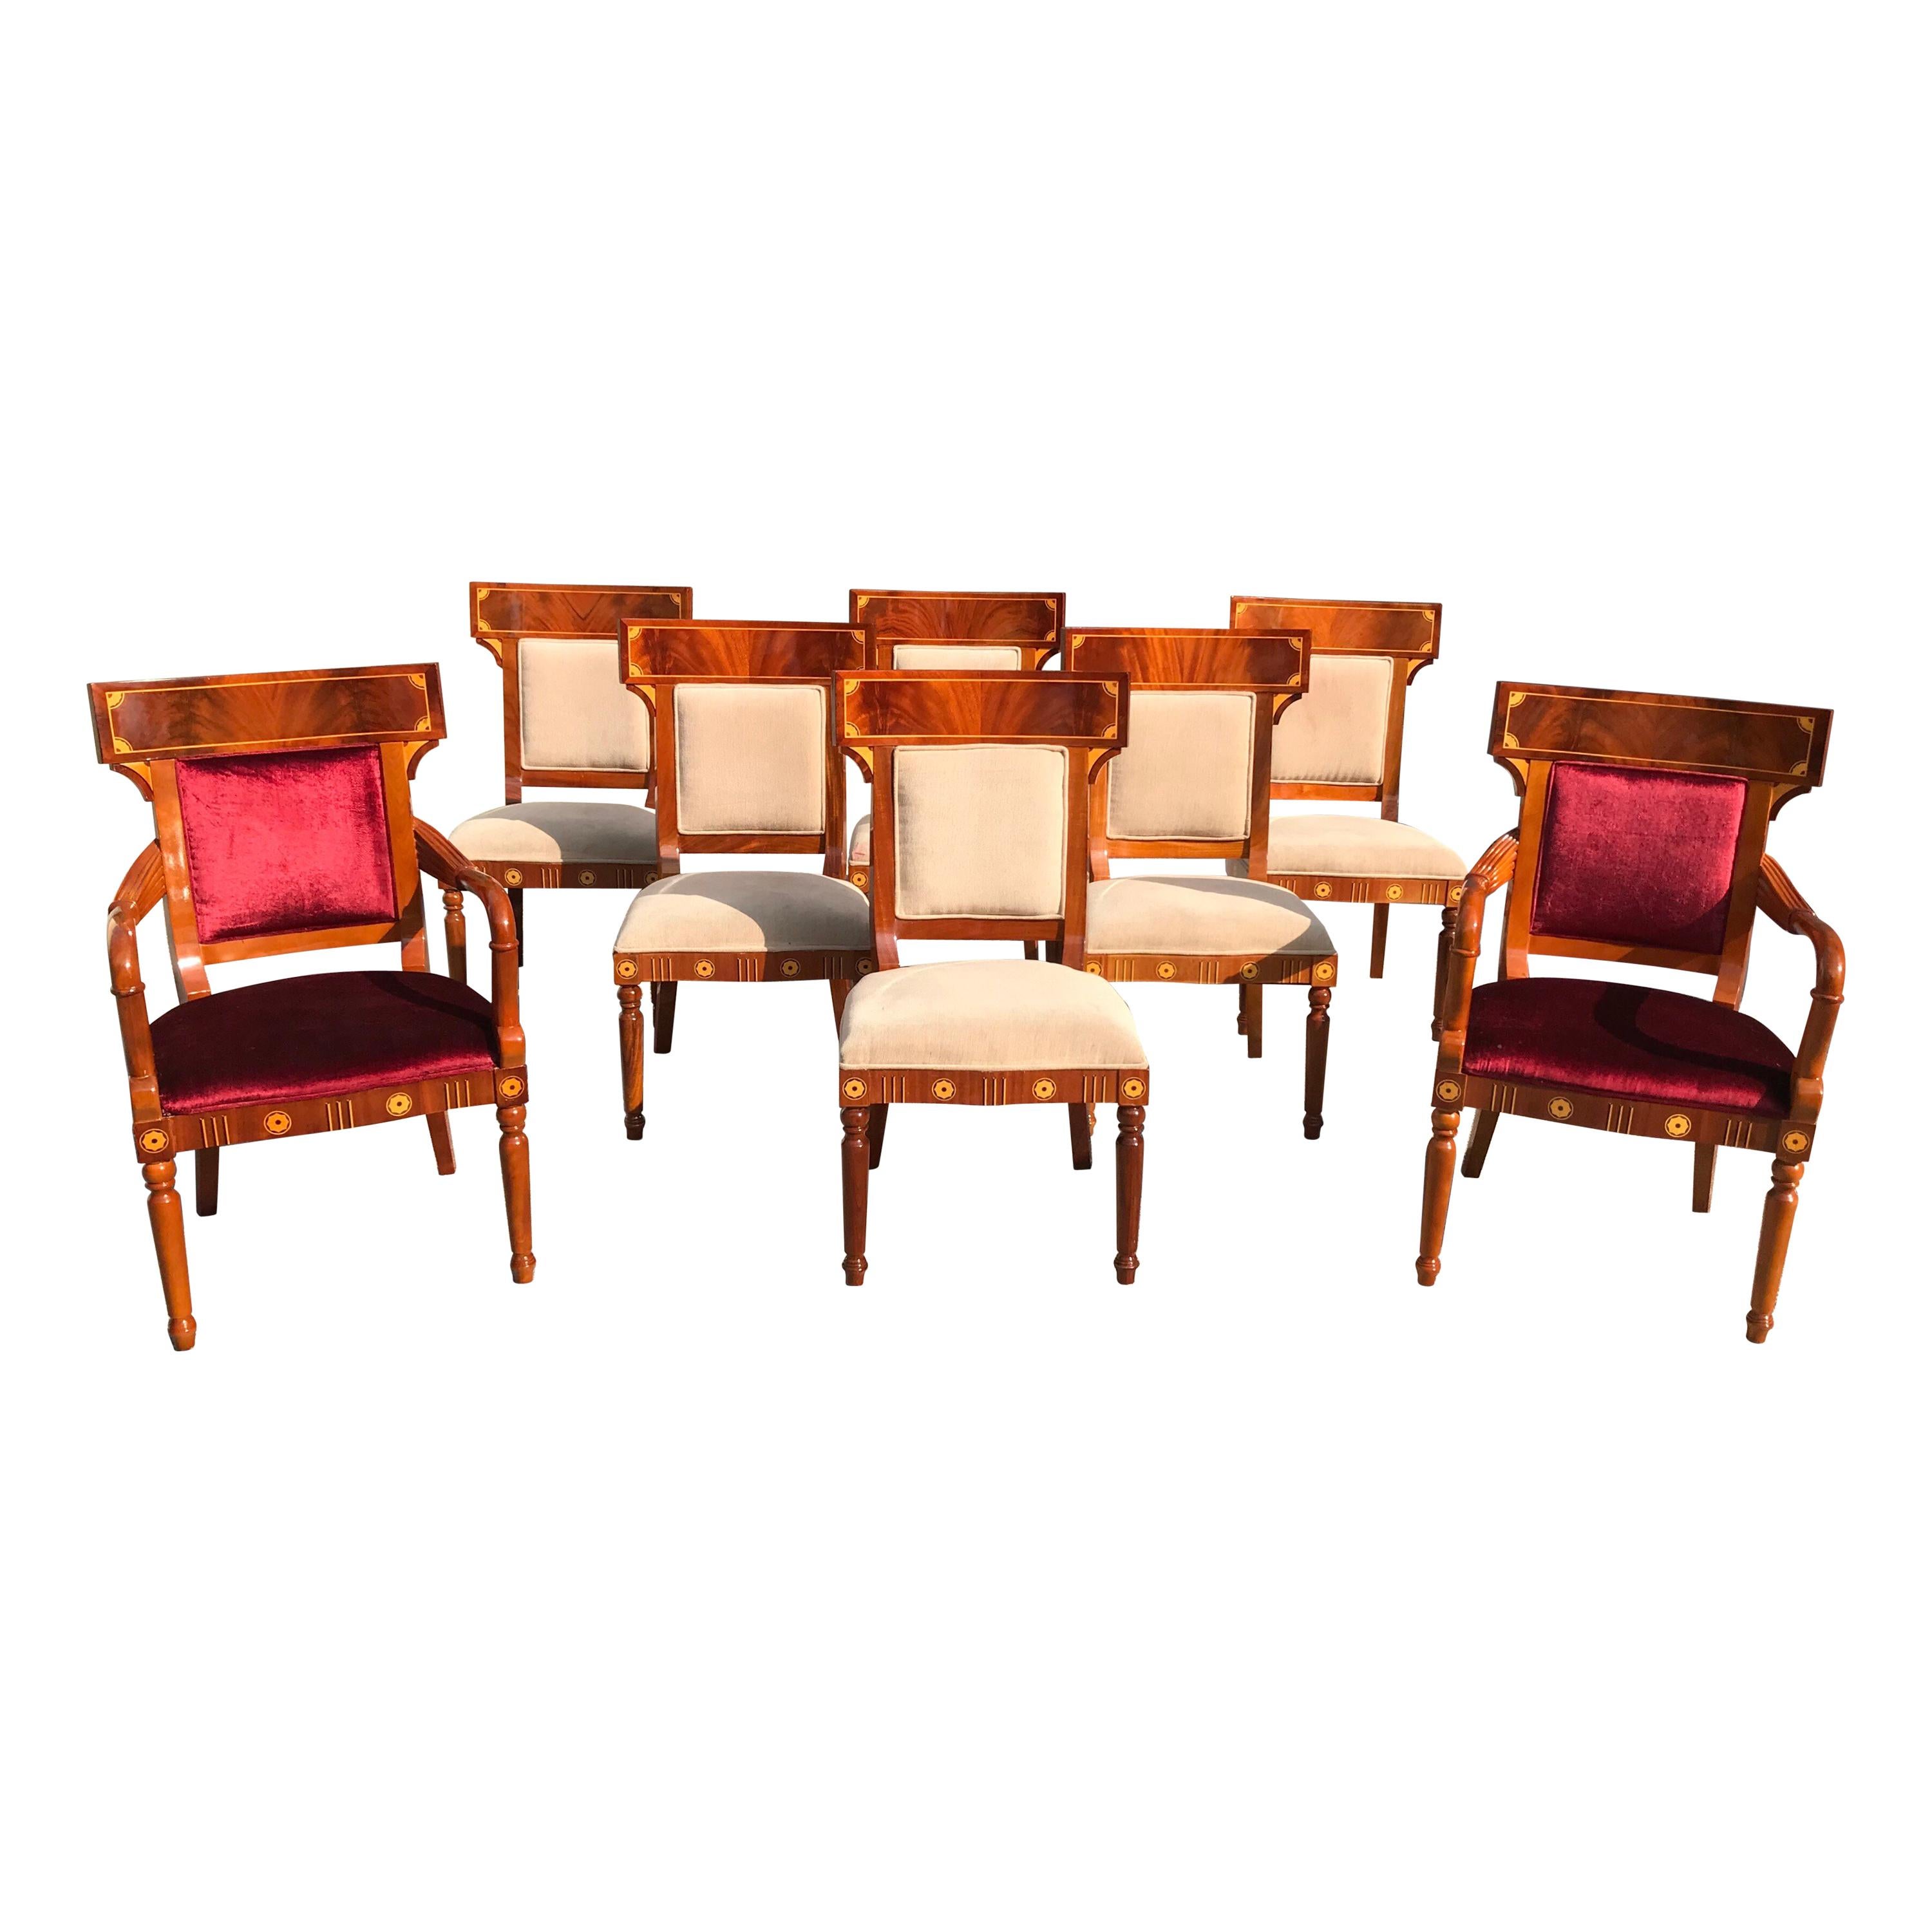 Set of 8 Biedermeier Style Flame Mahogany Dining Chairs, circa 1910s